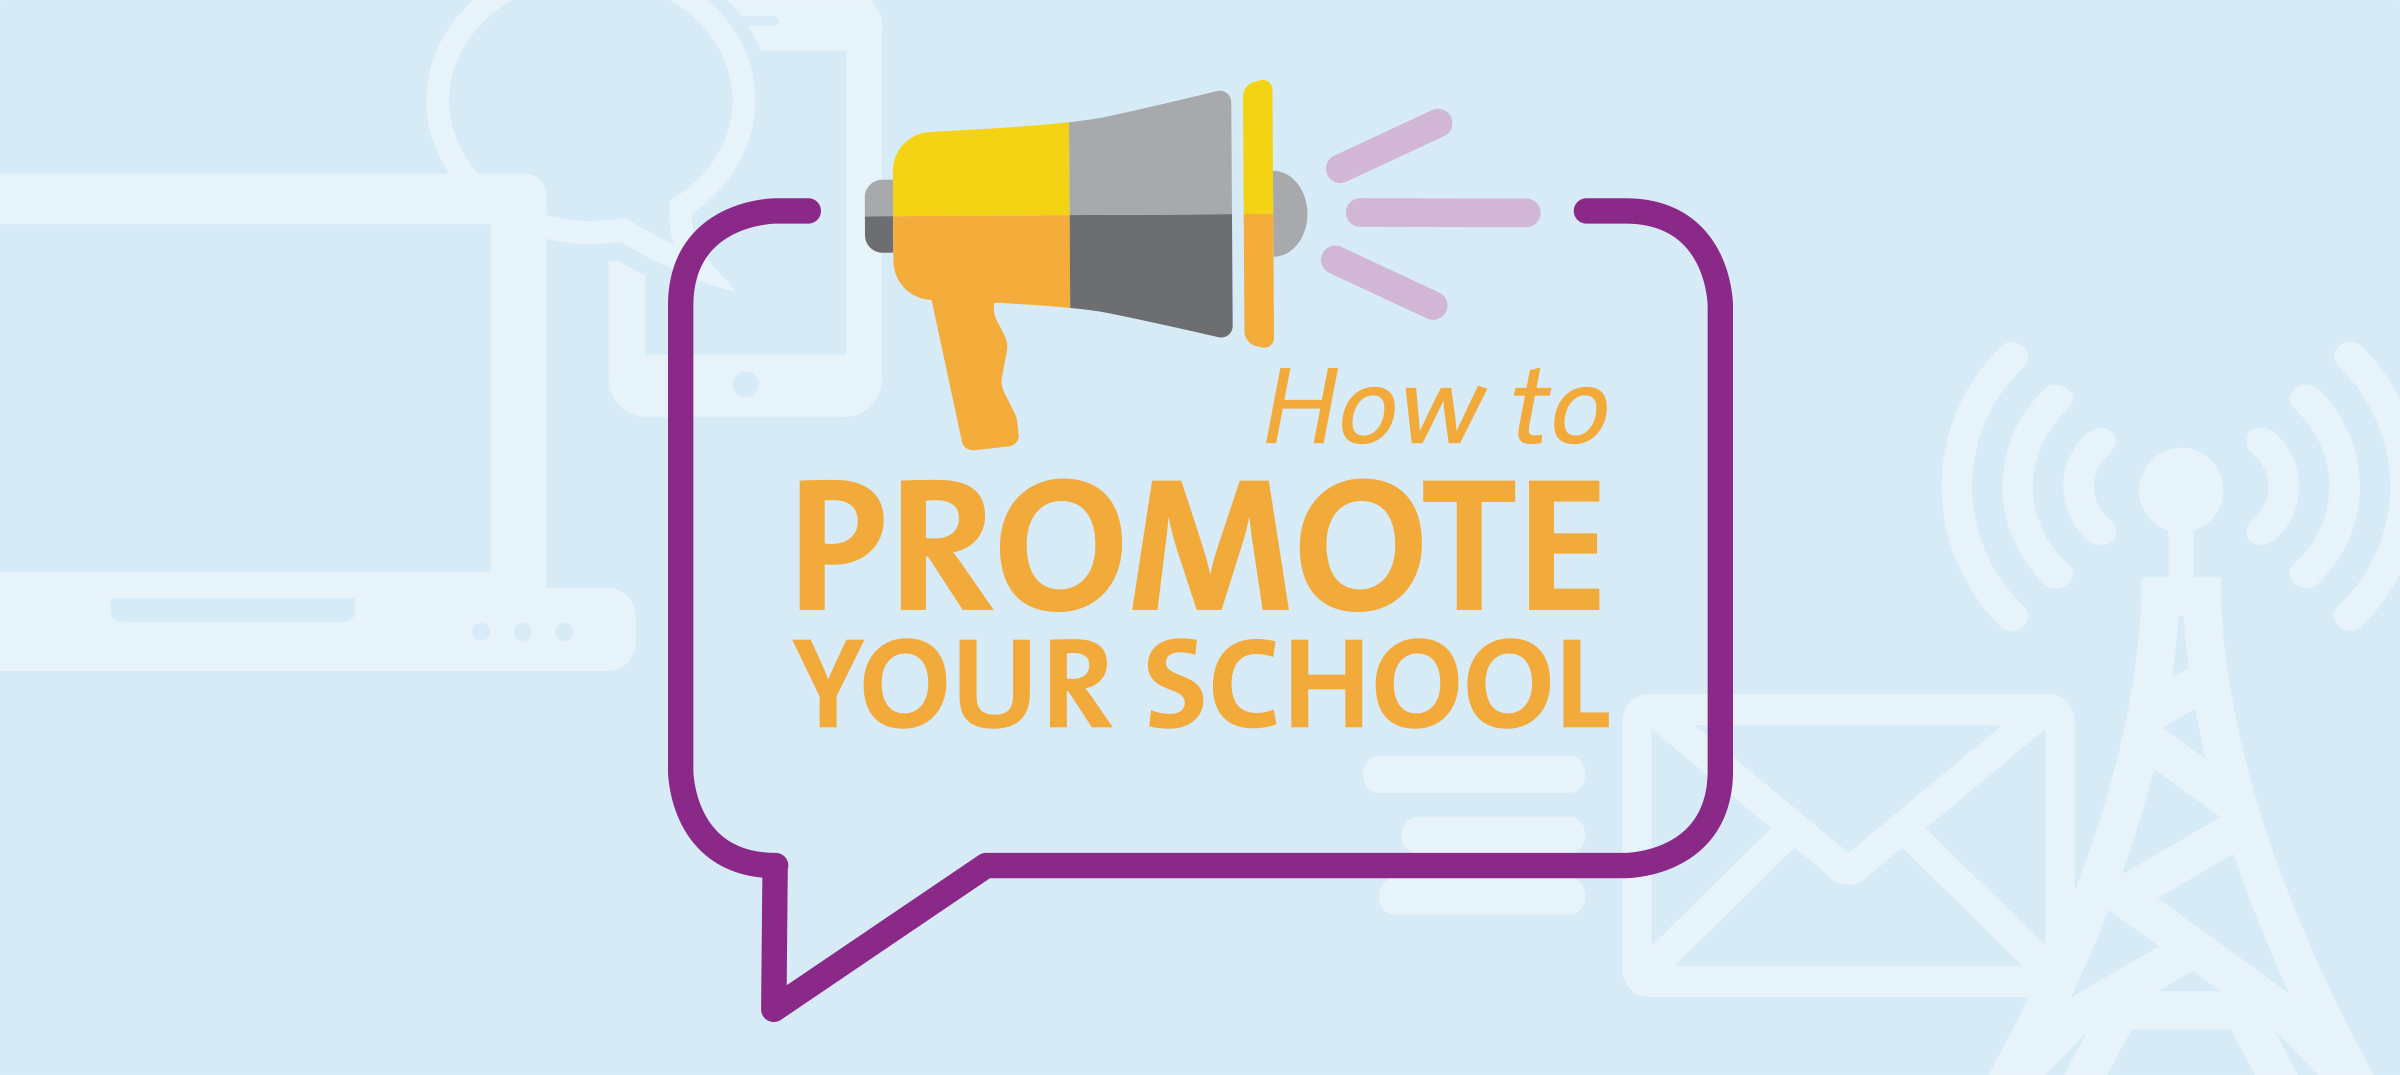 How to Promote Your School - Abeka